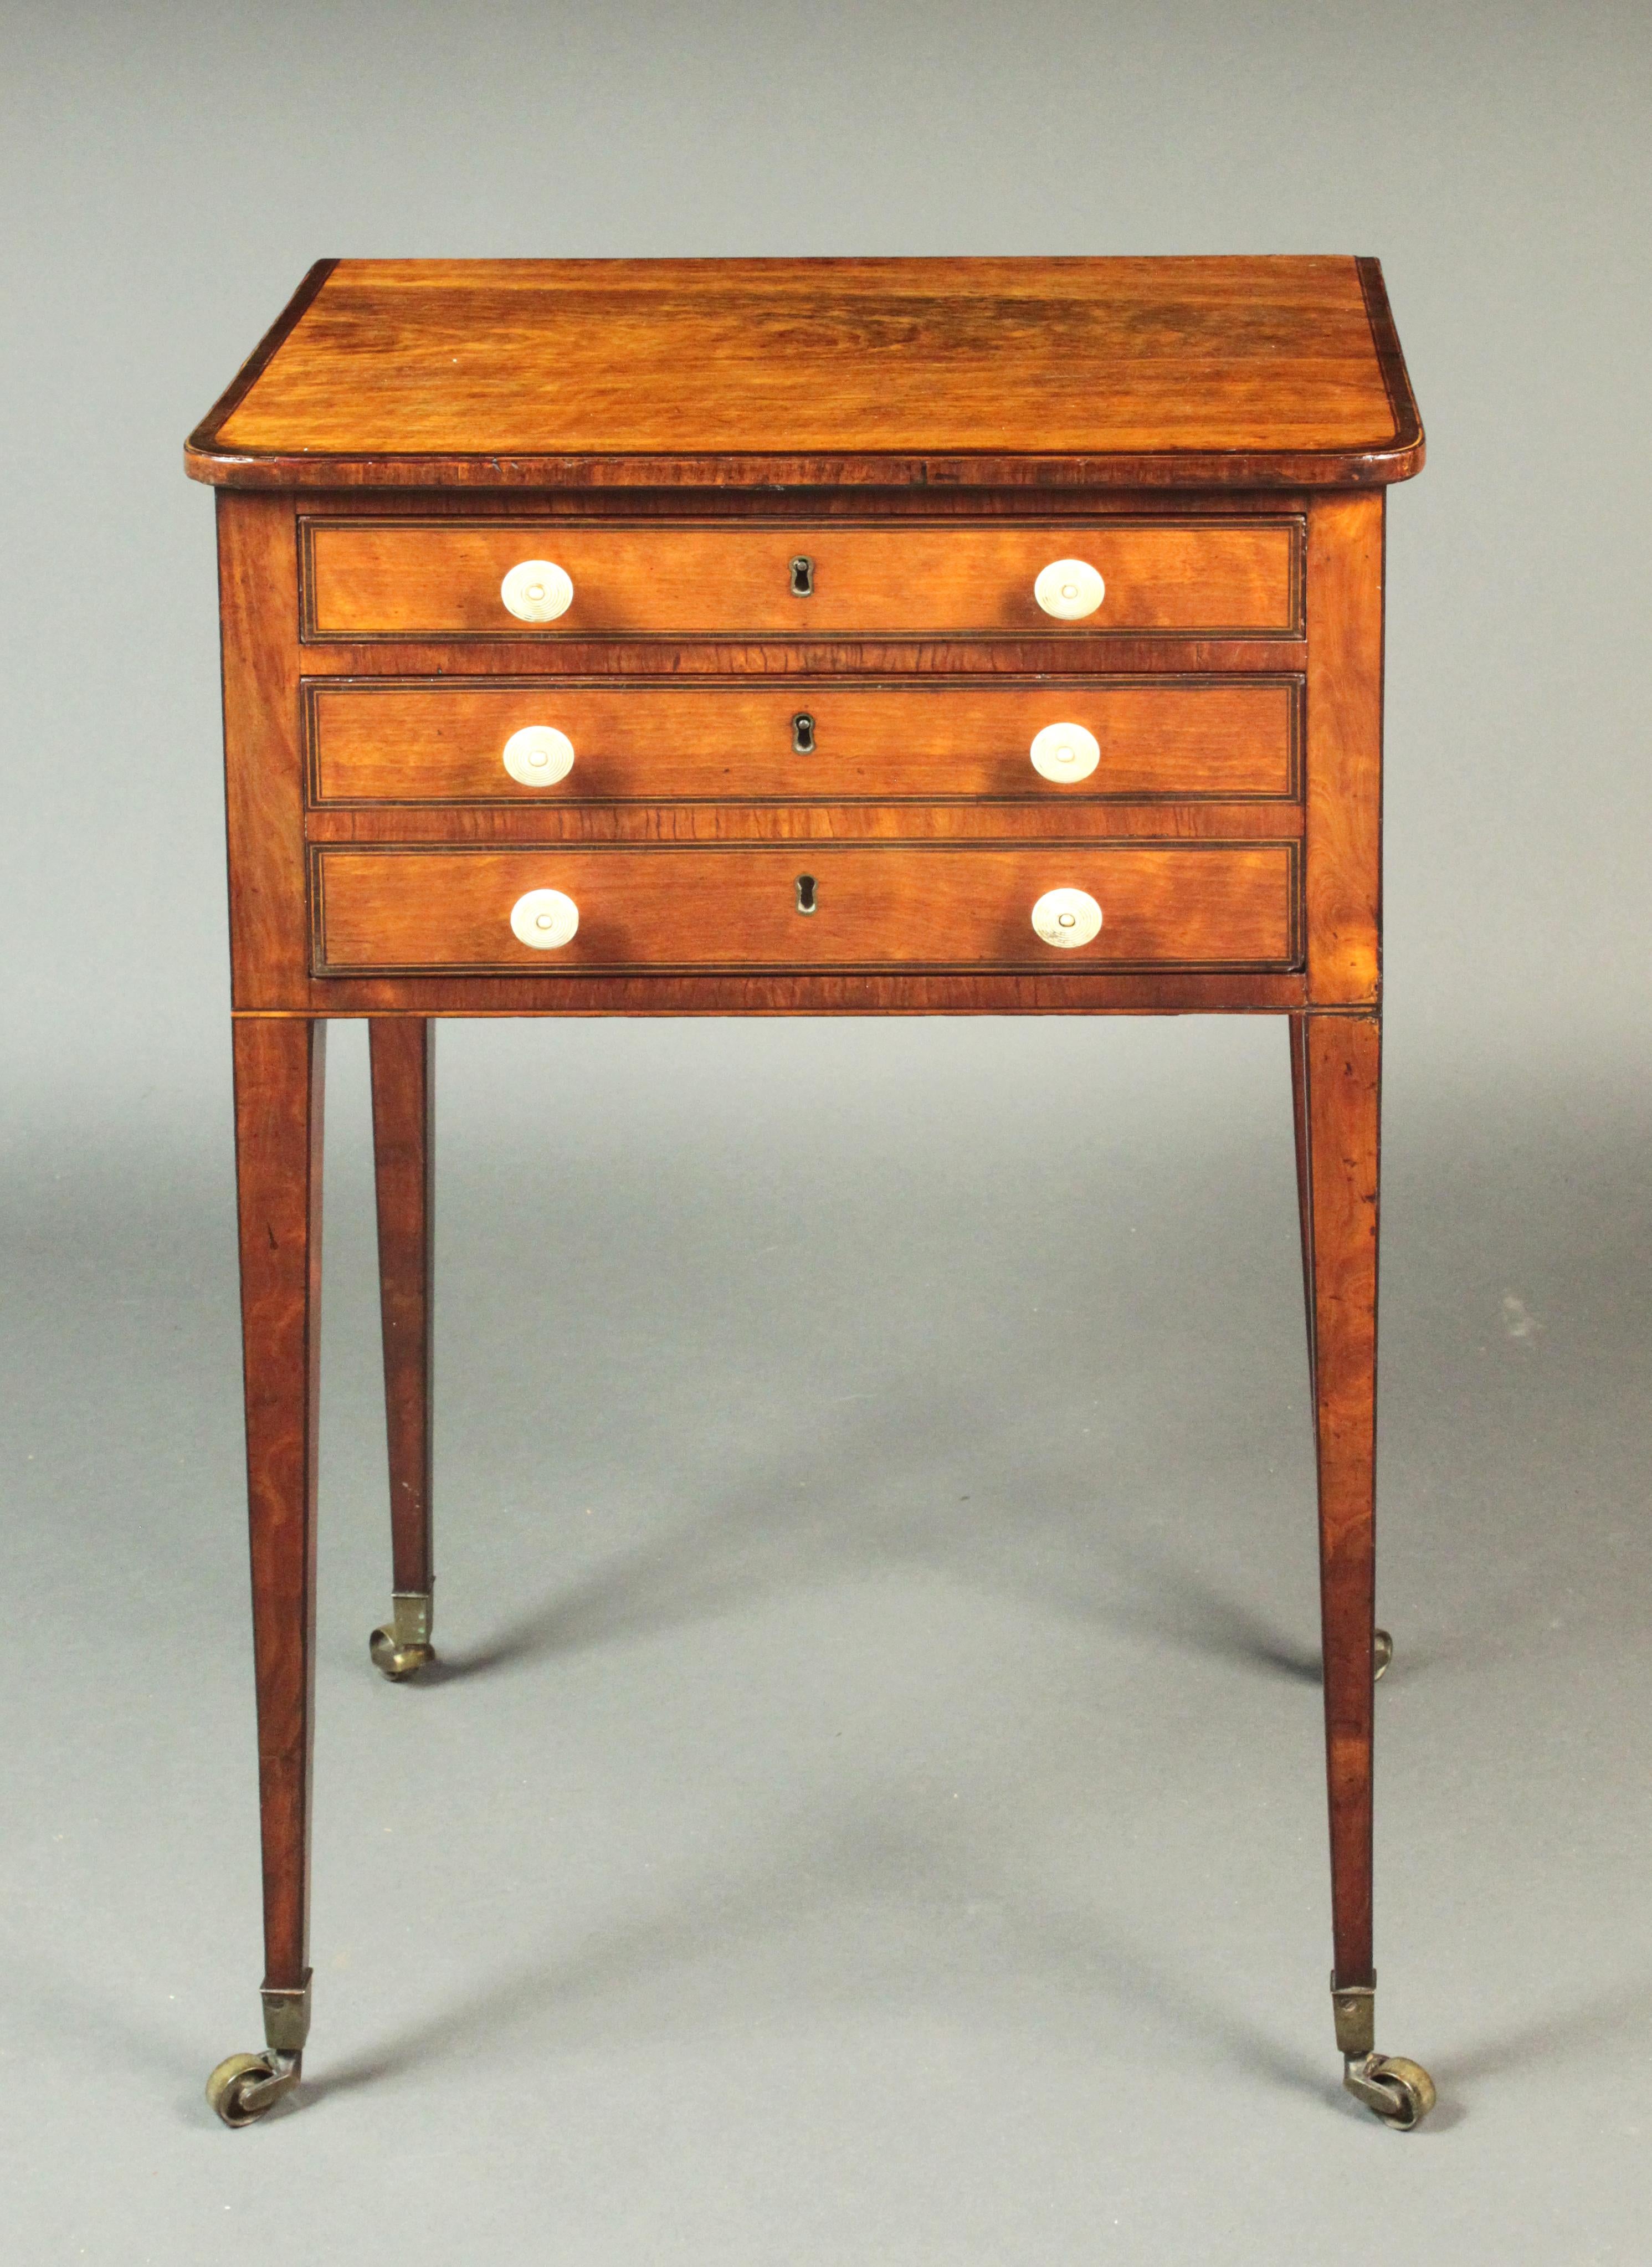 Fine George III Sheraton Period satinwood sewing table; fitted top drawer, two candle slides and an ink drawer at the side; the back with a folding flap and an additional wooden hook to hold a sewing bag or basket.
Boxwood and ebony stringing on the